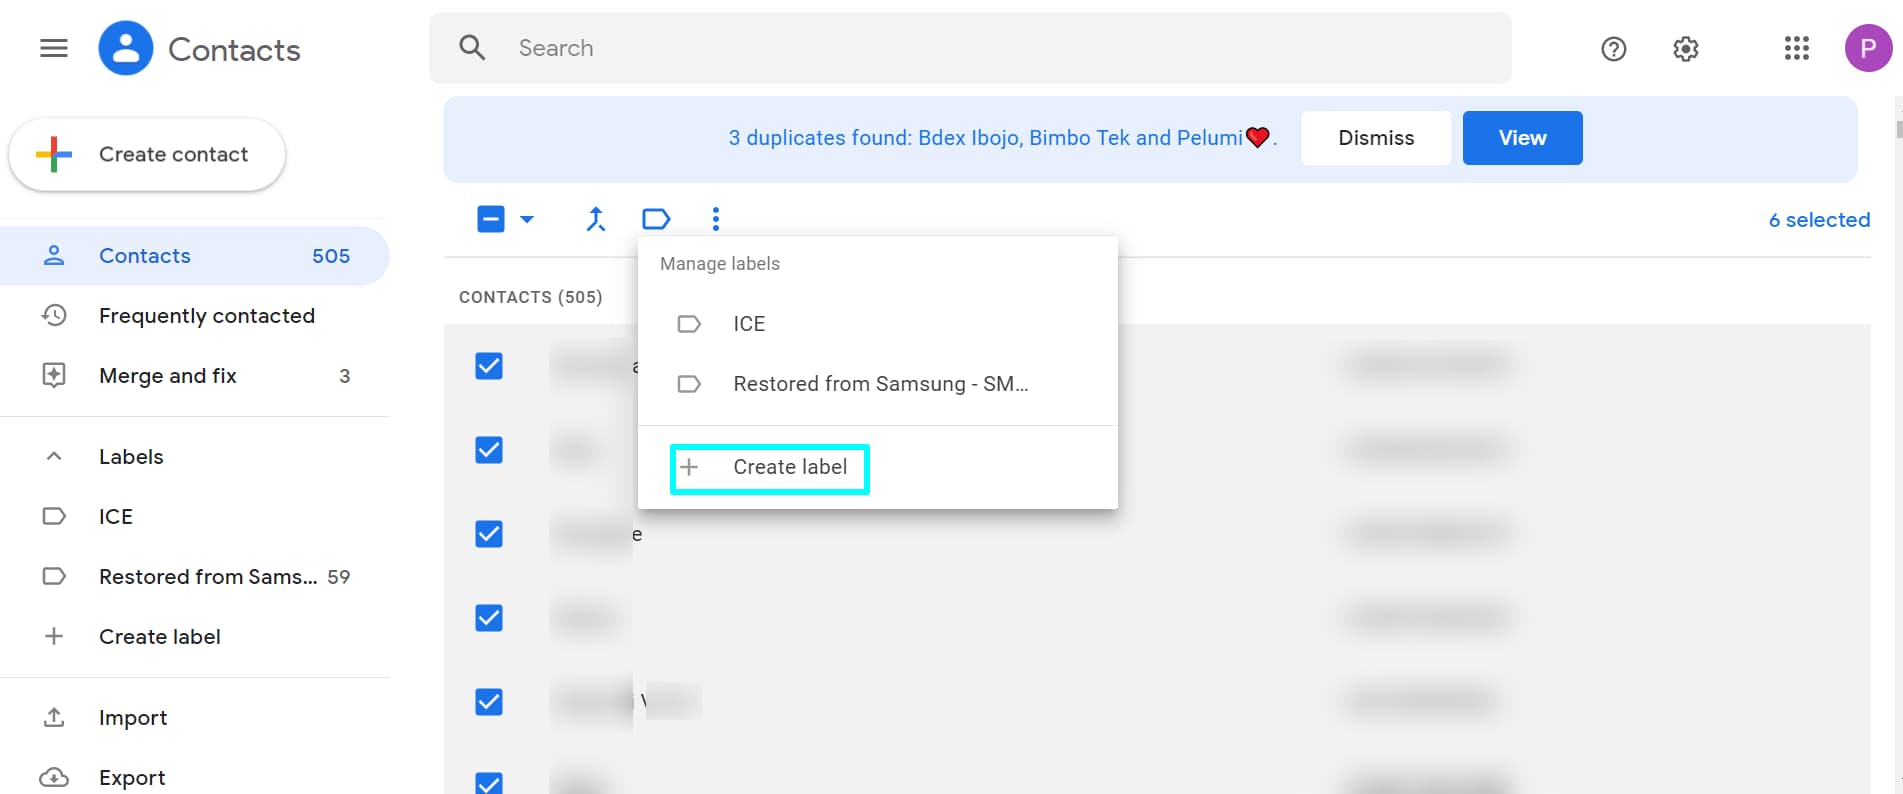 how to create an email group in Gmail: tap create label